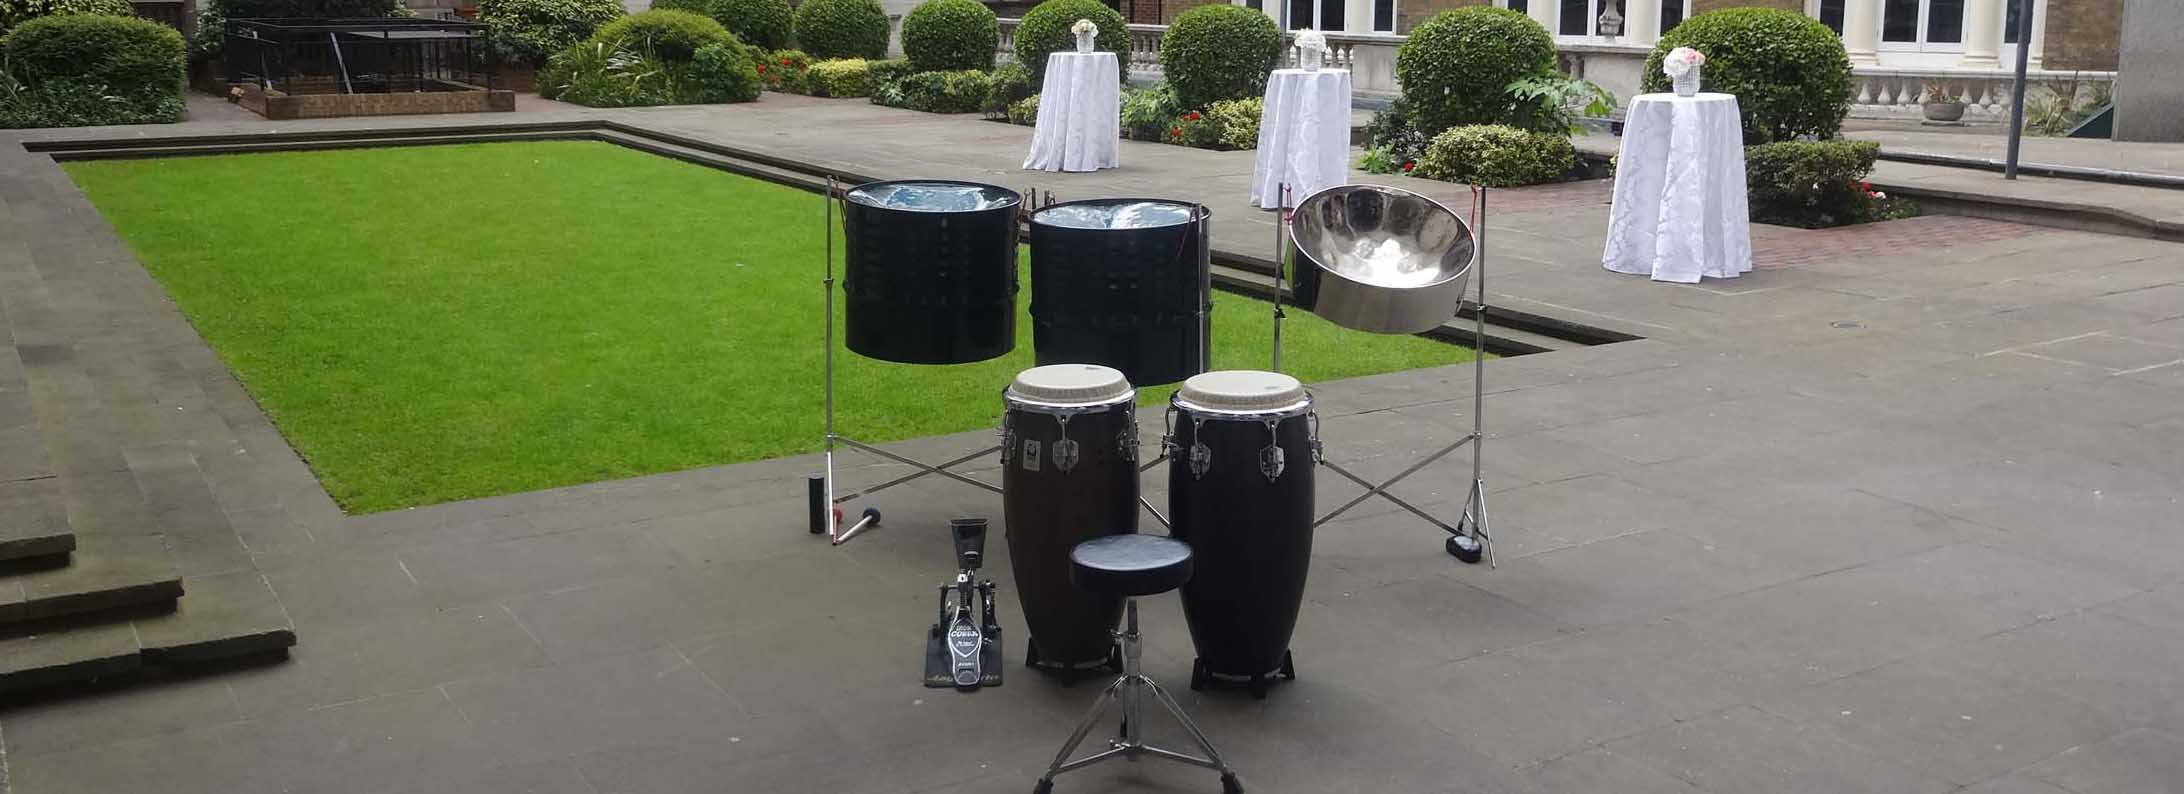 Colourful steel drum band performing, showcasing top-quality entertainment for parties and events at steelbandhire.com.